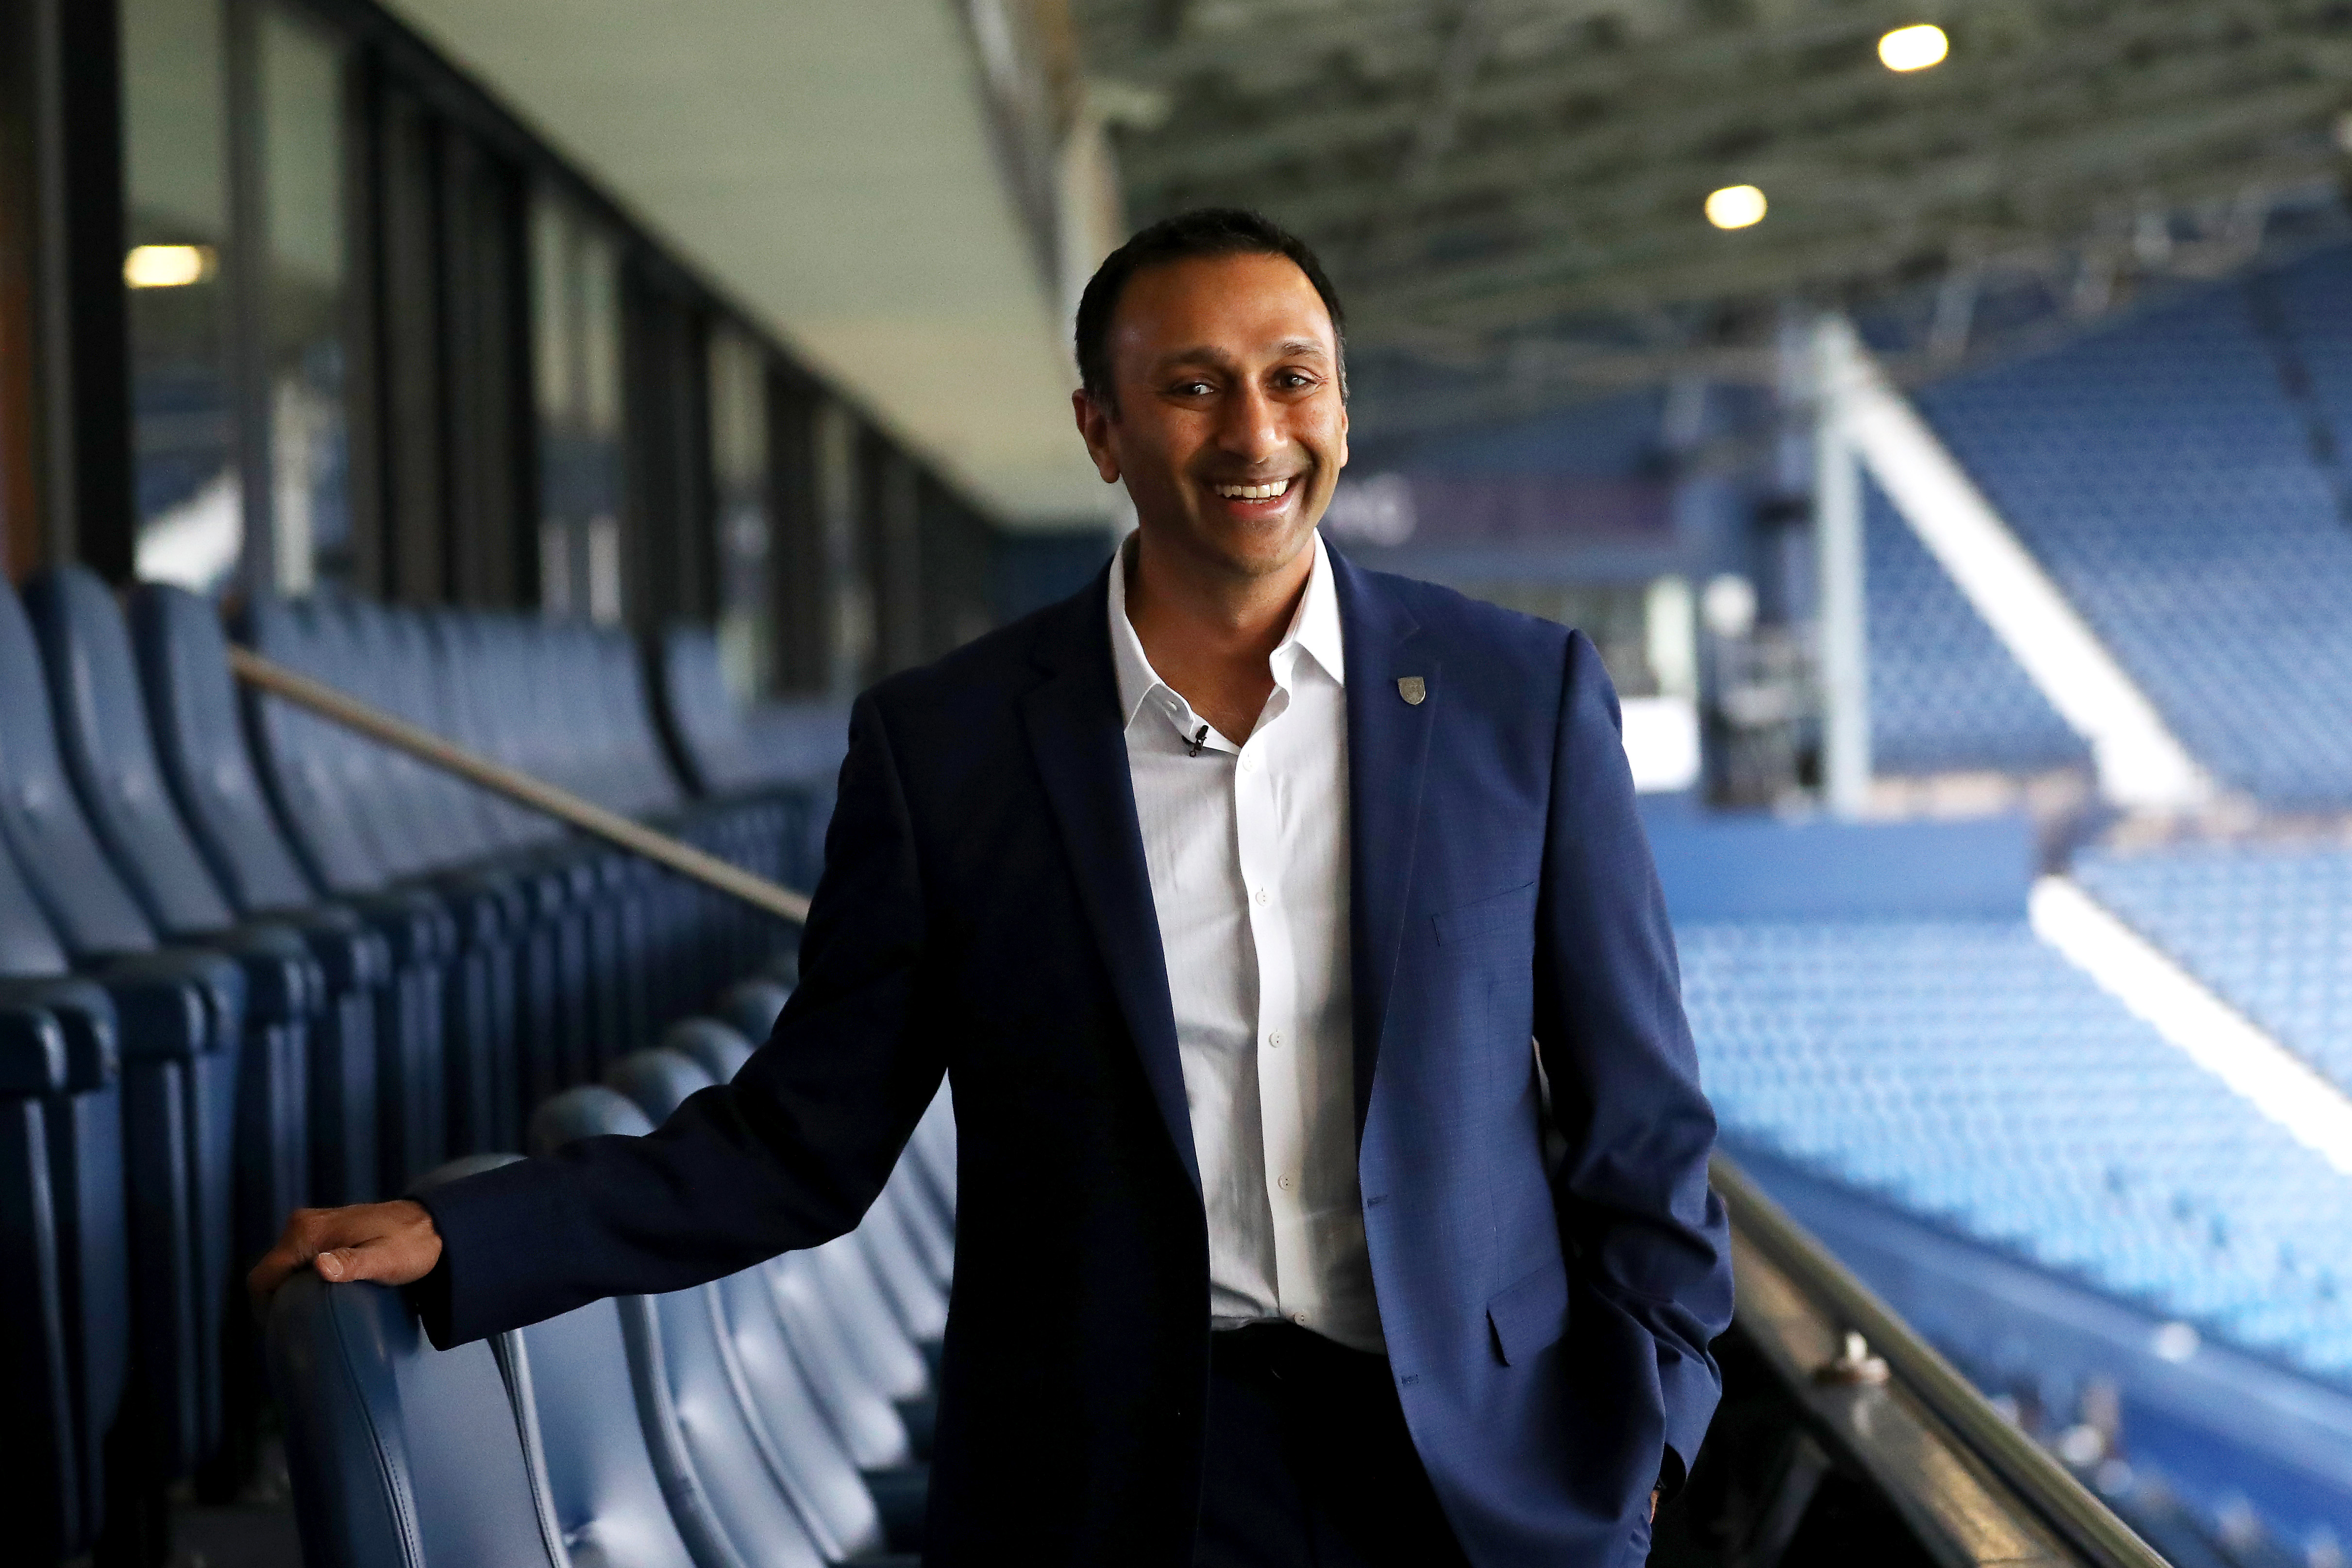 Shilen Patel stood on the balcony in the West Stand at The Hawthorns smiling at the camera